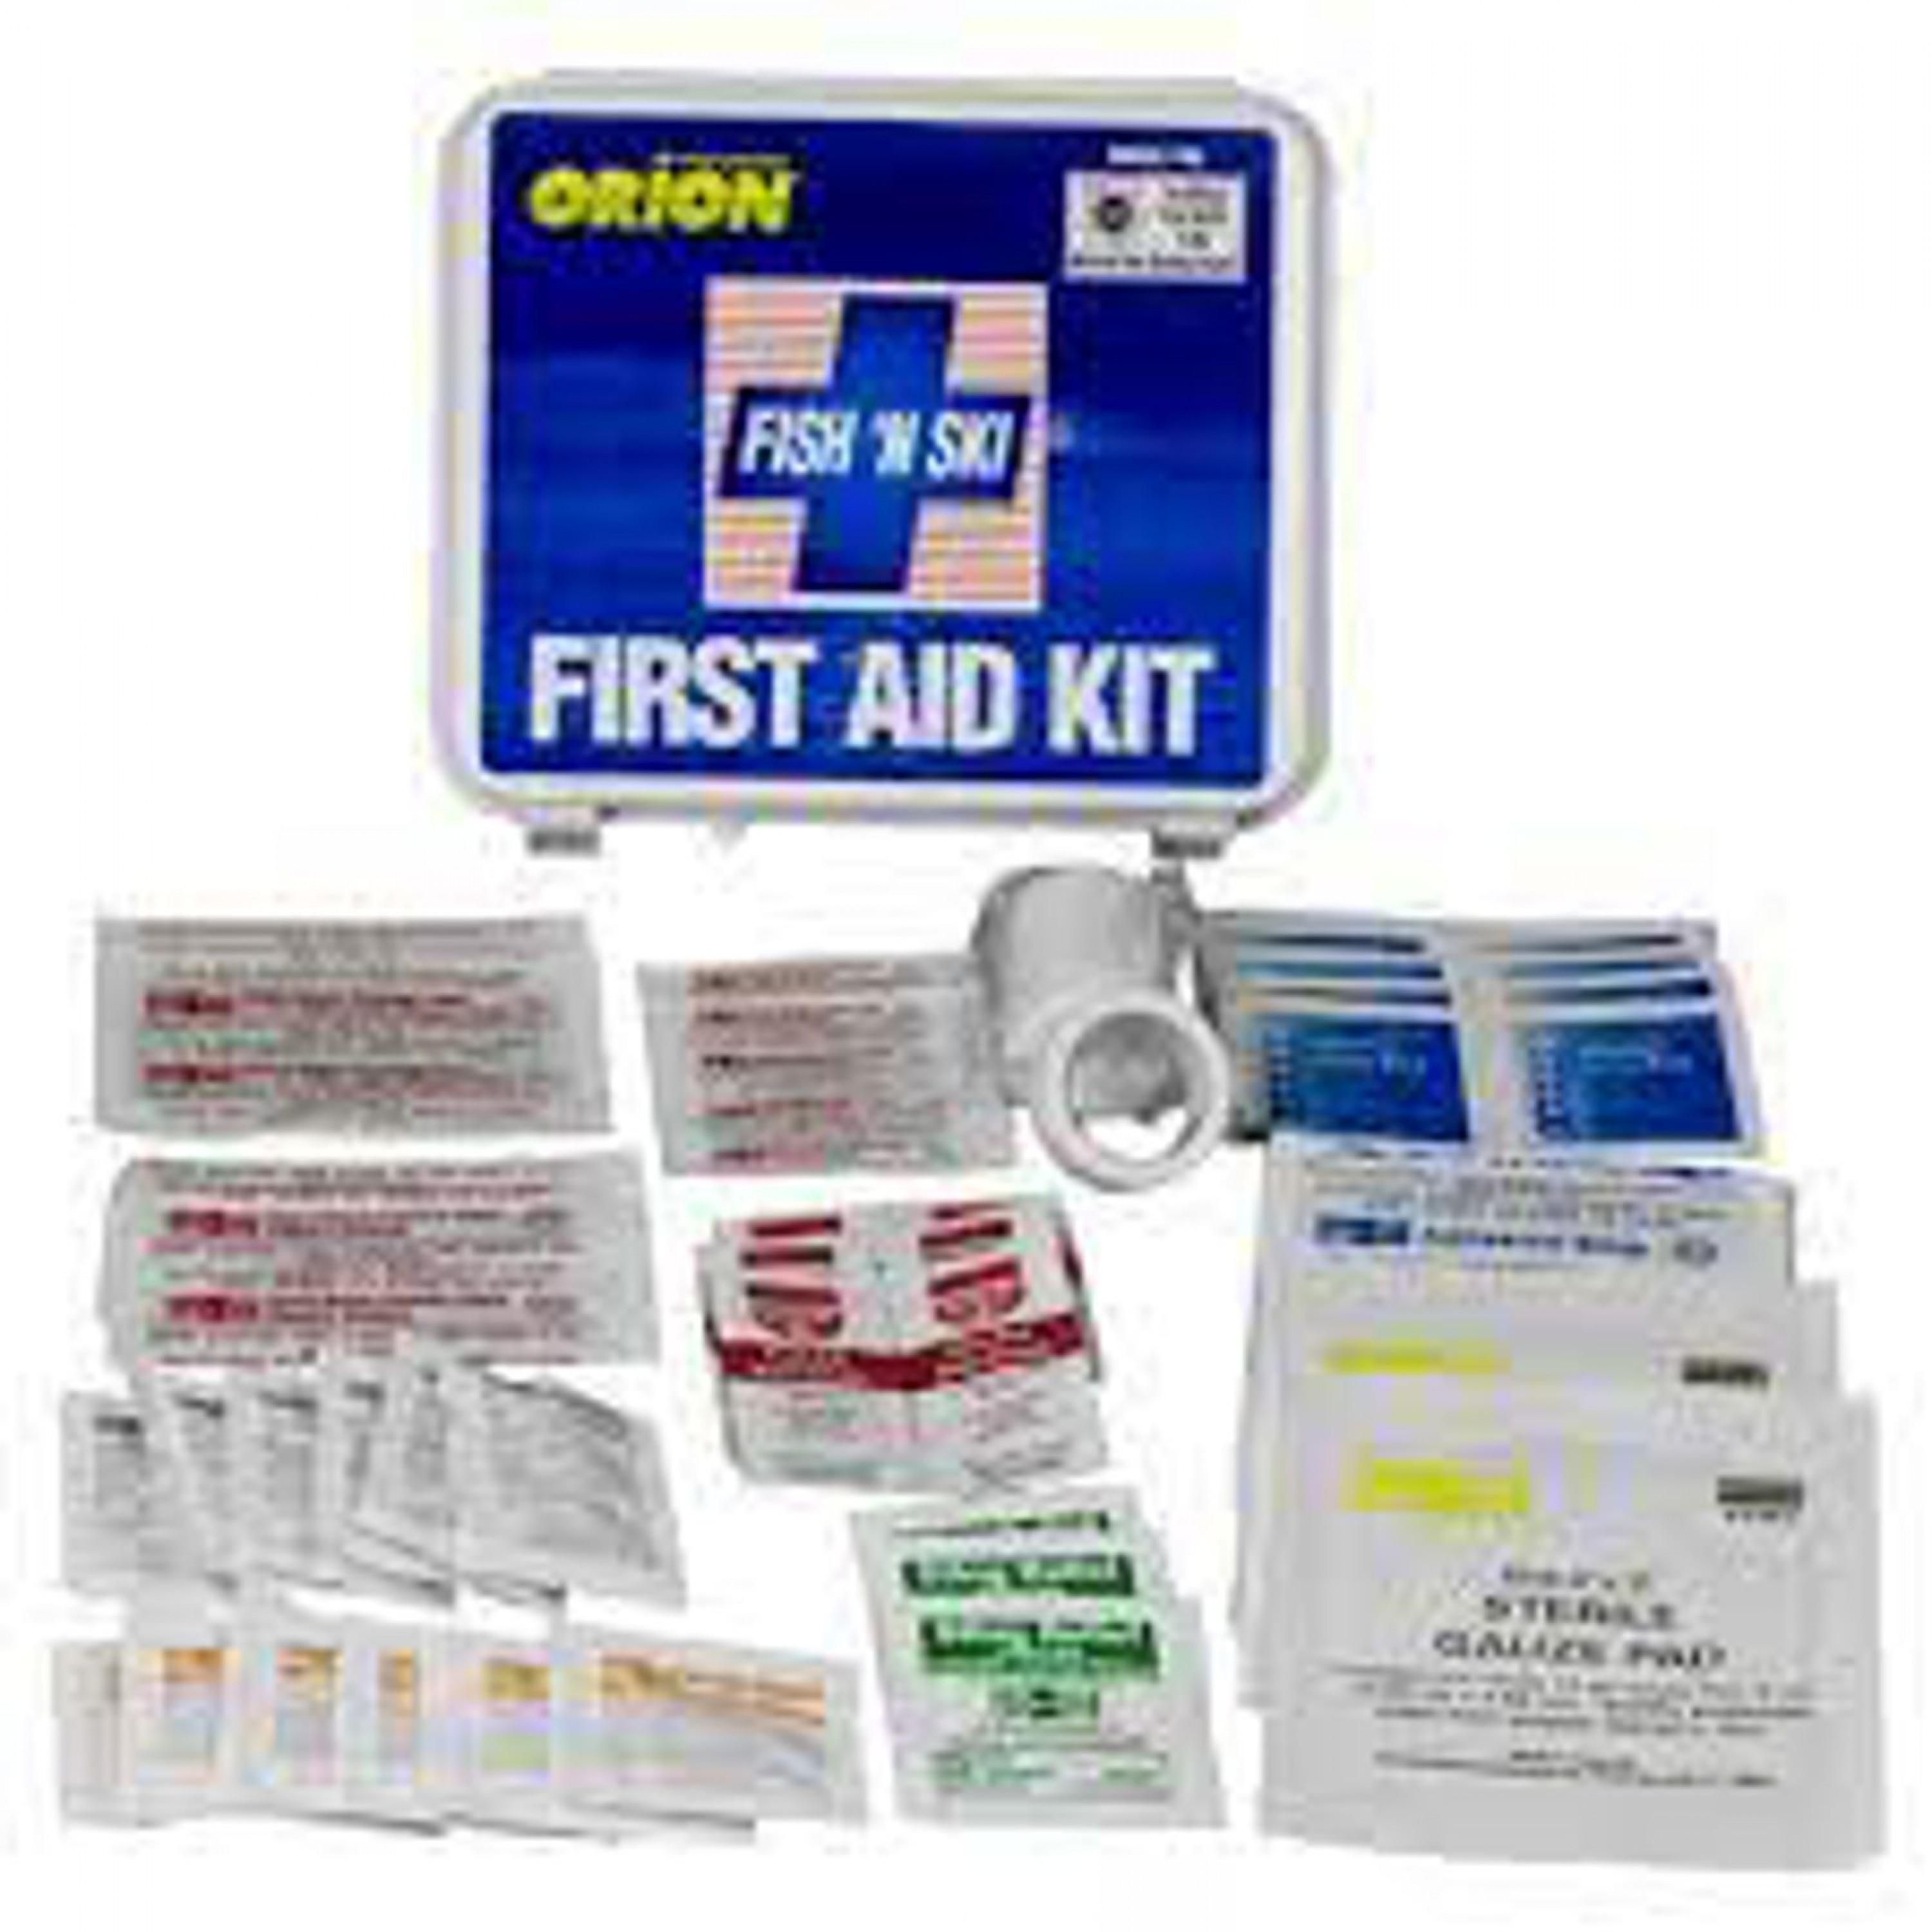 ORION FISH 'N SKI FIRST AID KIT,74 TOTAL PIECES.